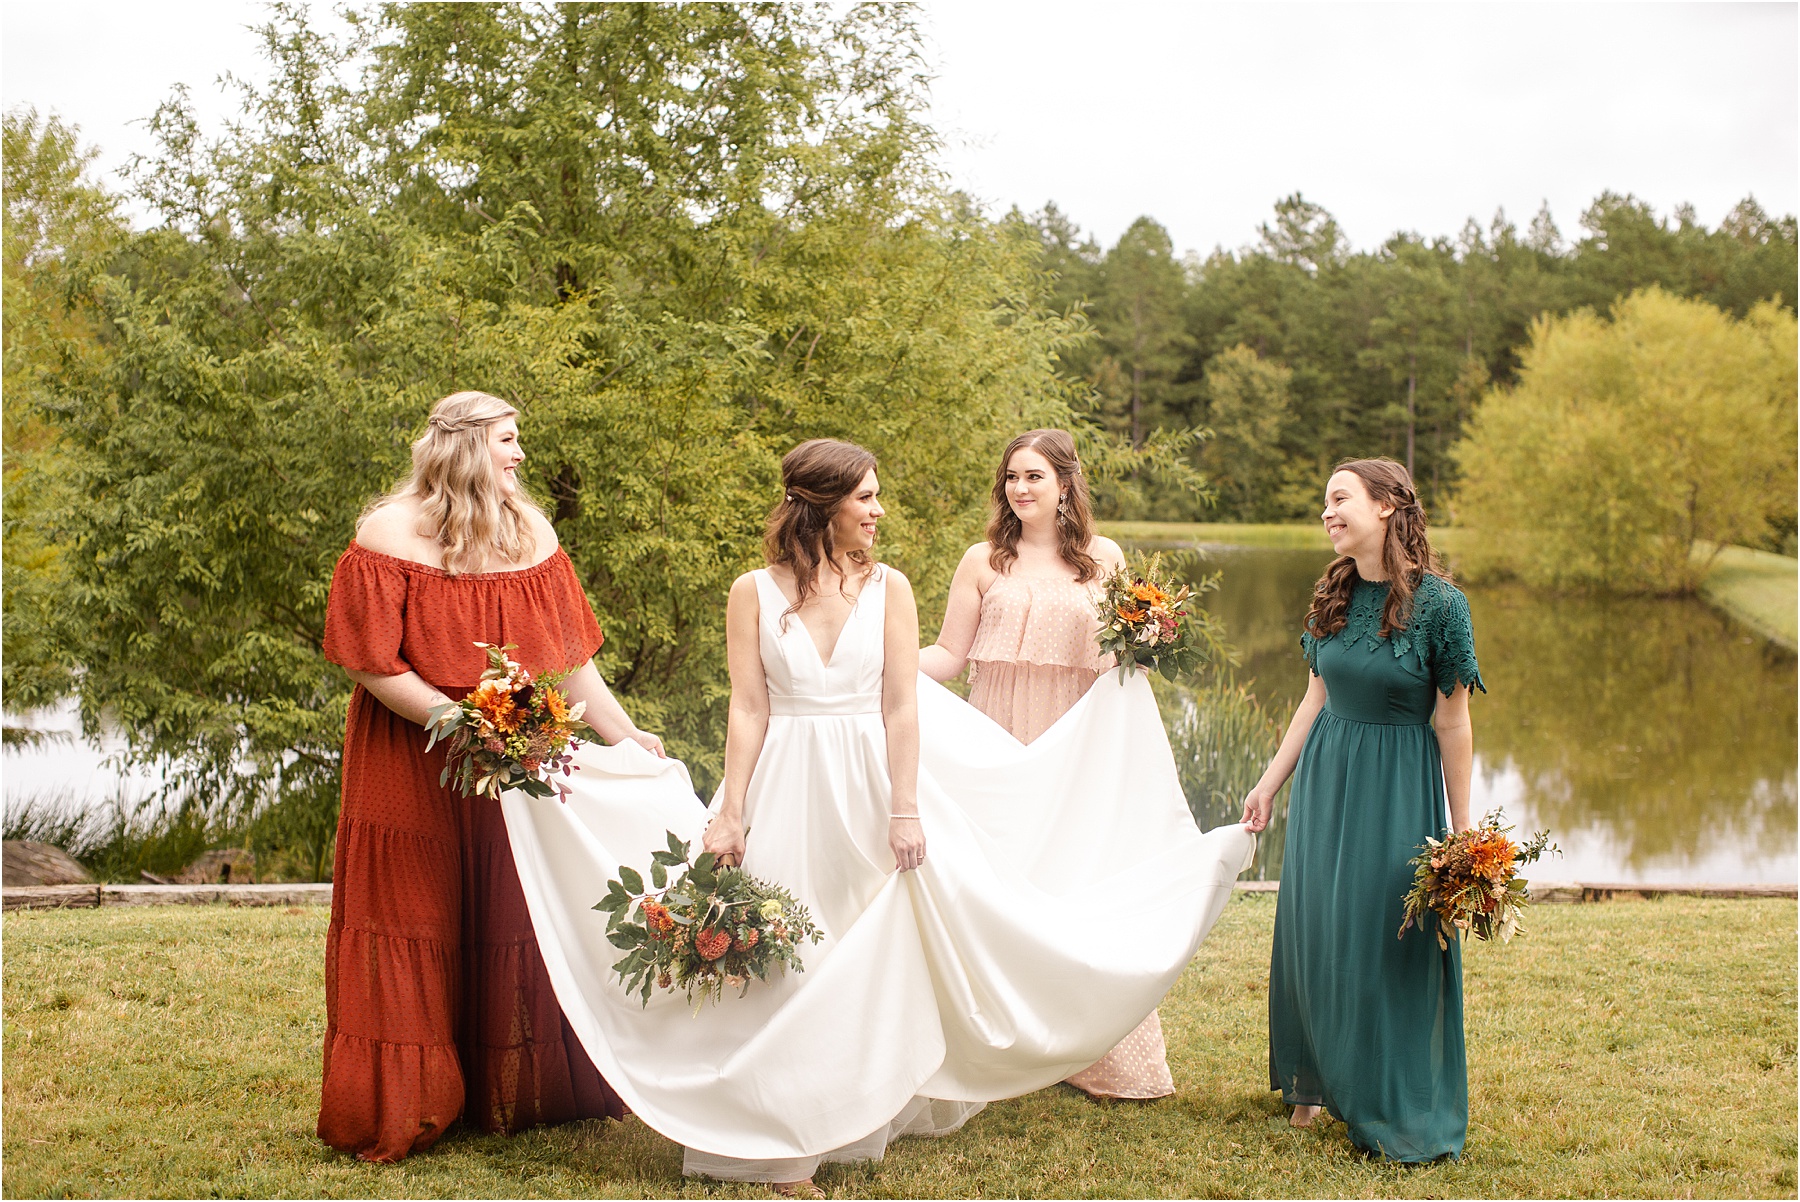 Bridesmaids in colored dressed hold bride's wedding dress in the grass